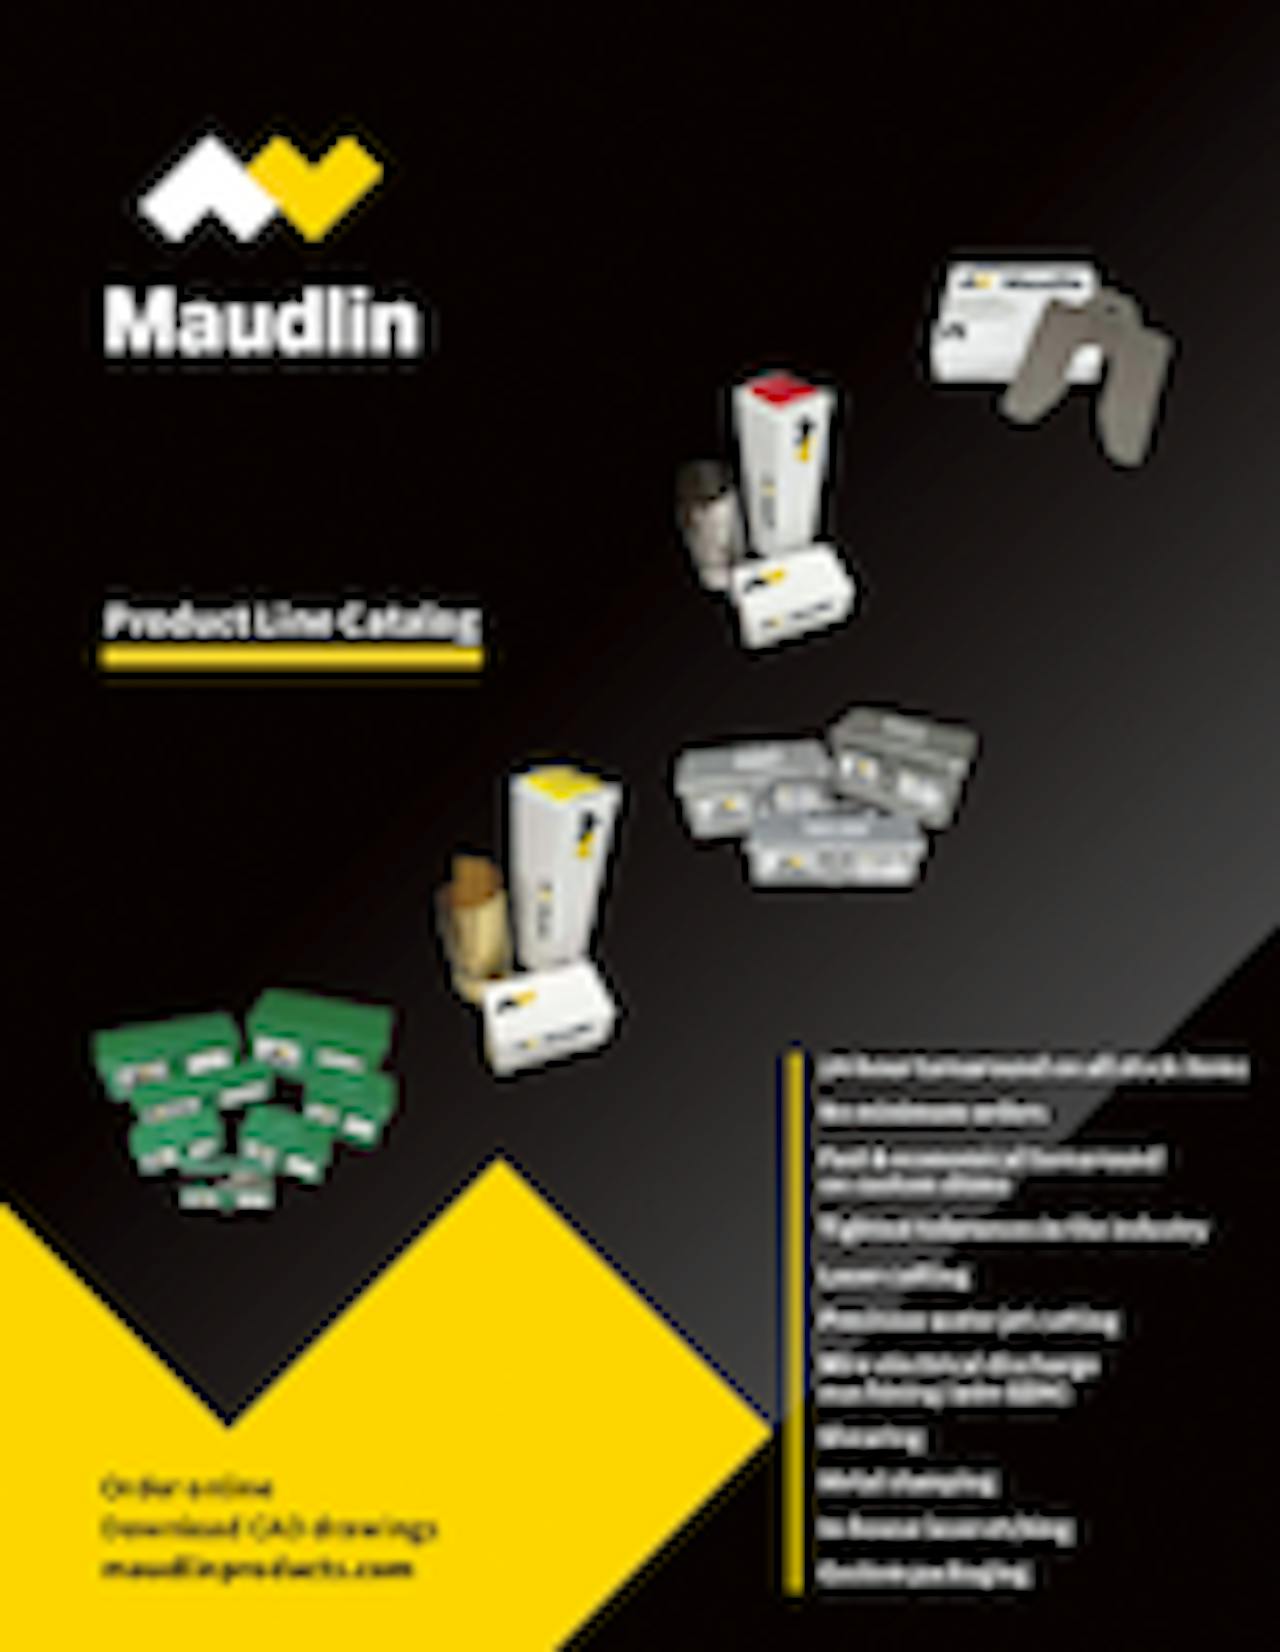 Maudlin product catalog cover